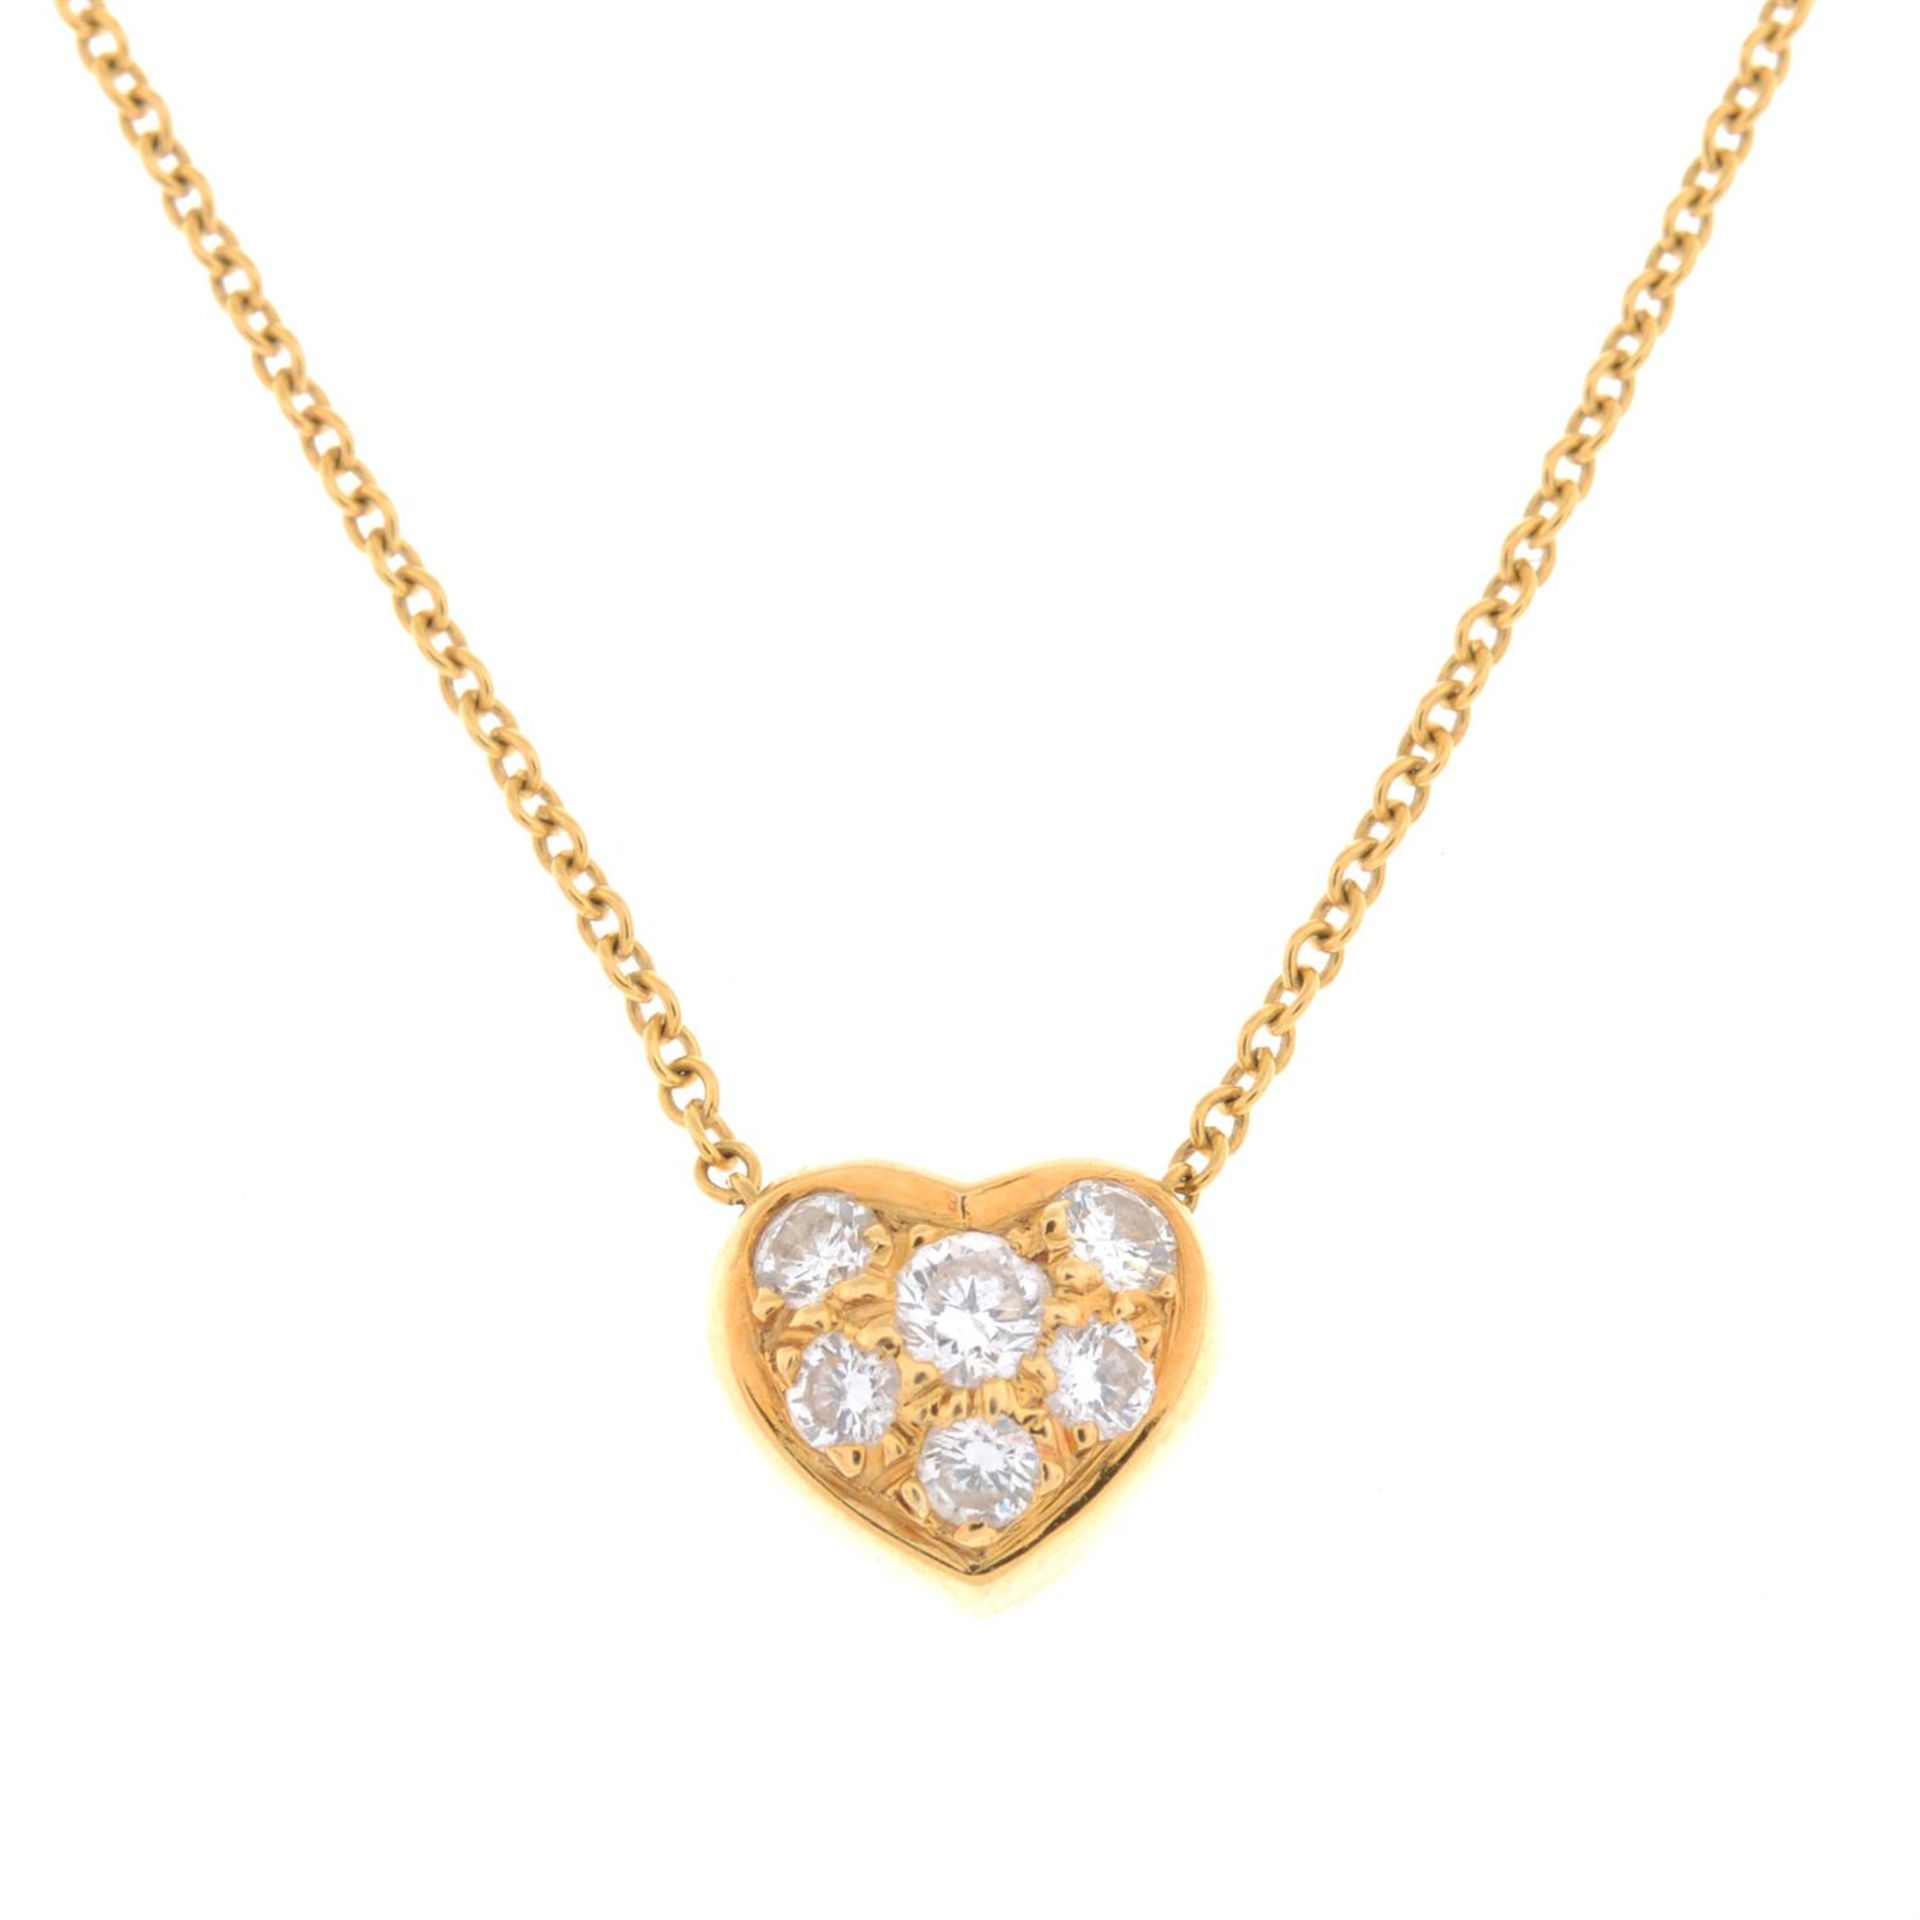 A brilliant-cut diamond heart pendant, on an integral trace-link chain, by Tiffany & Co.